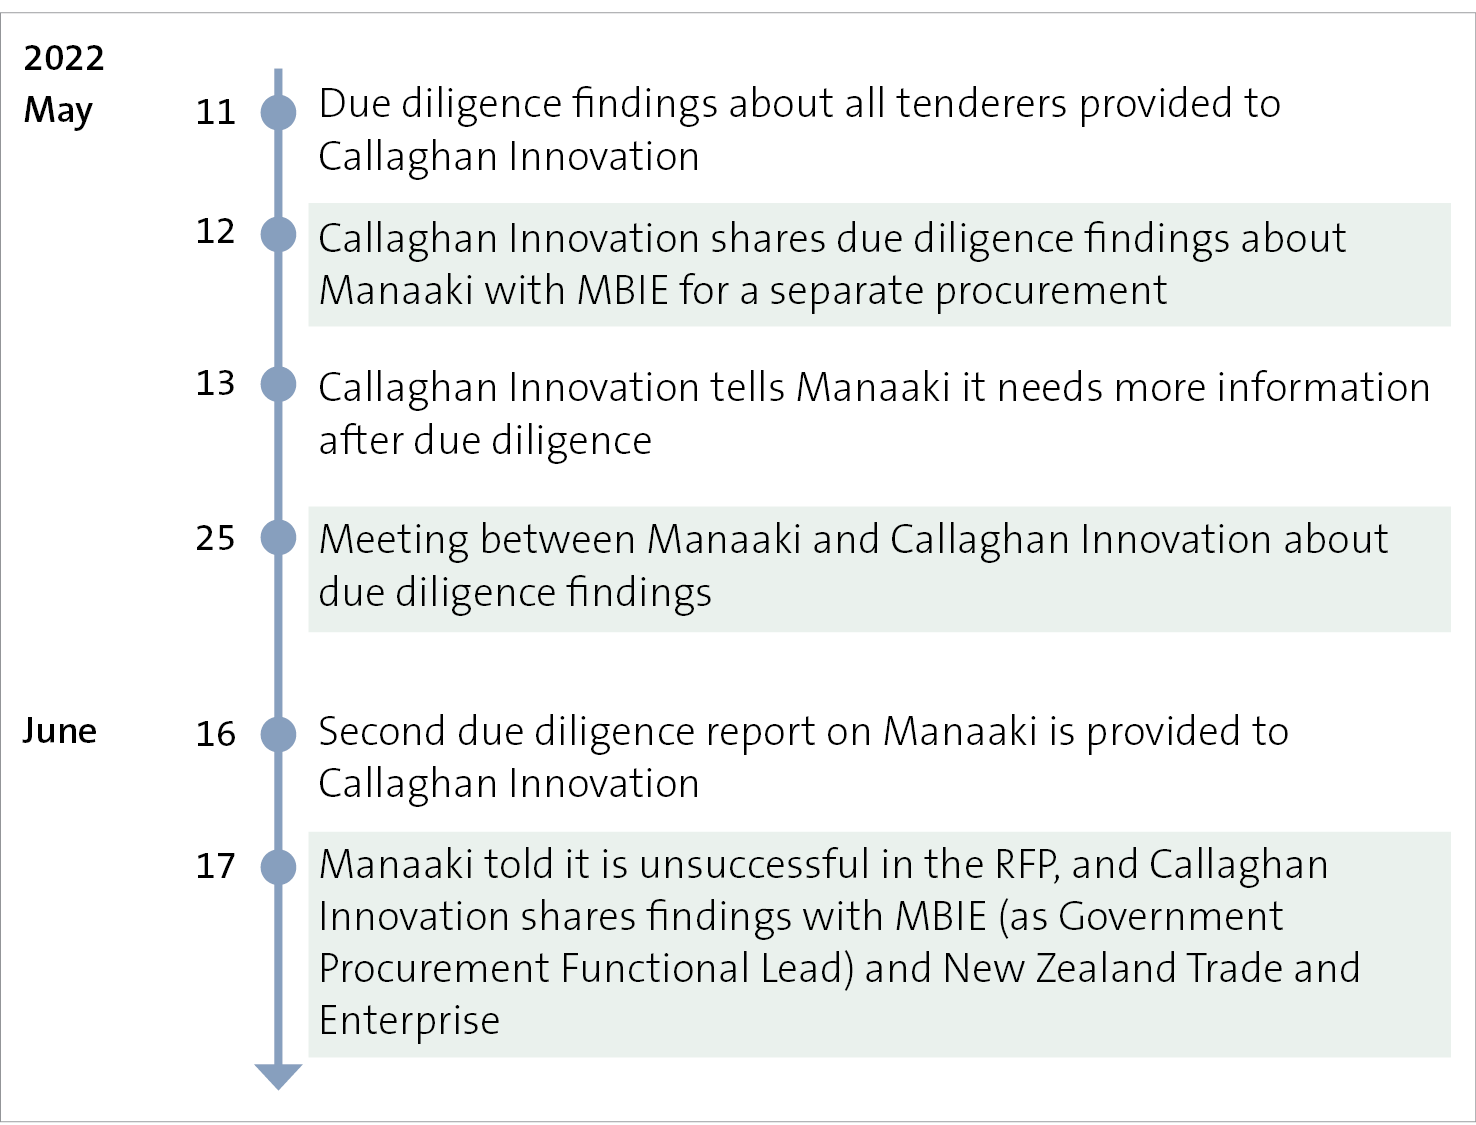 Figure 5: Timeline of events when Callaghan Innovation shared the due diligence reports about Manaaki, May 2022 to June 2022